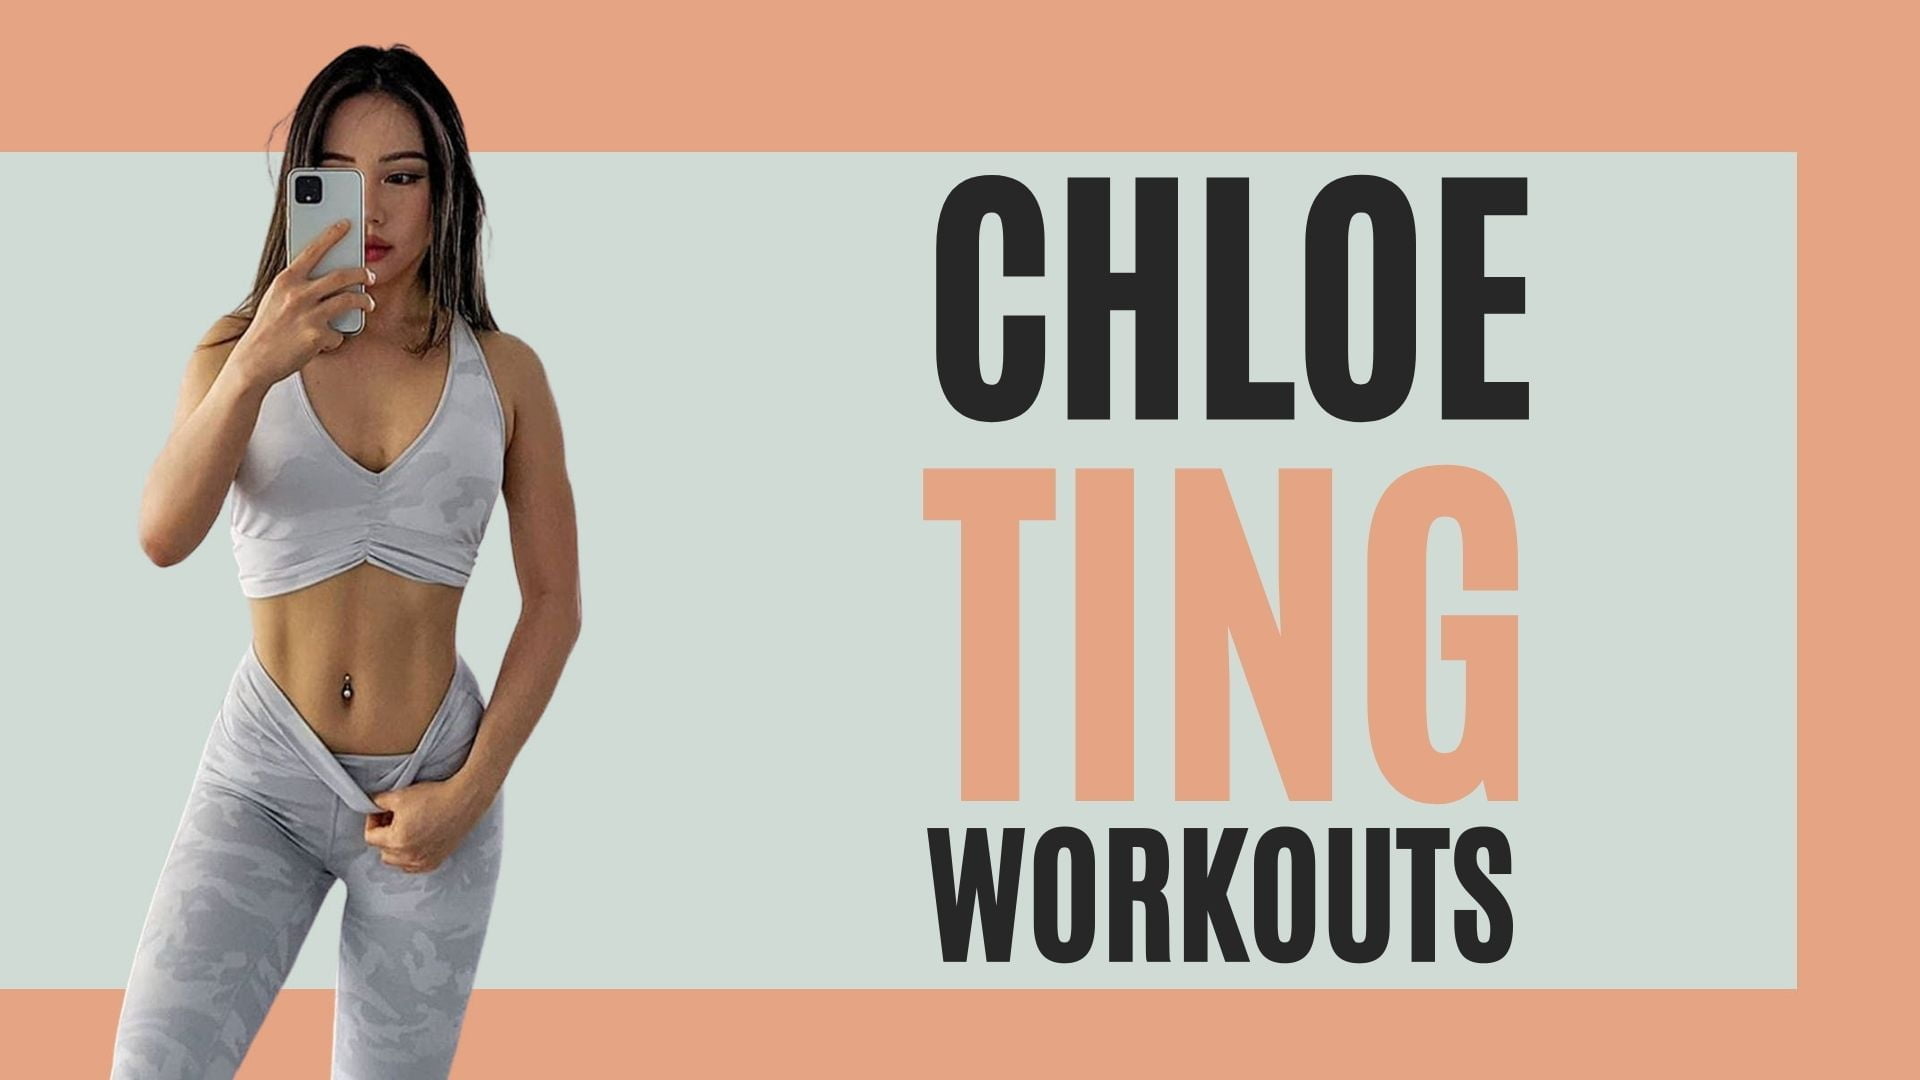 The Detailed Review Of Chloe Ting Workouts!